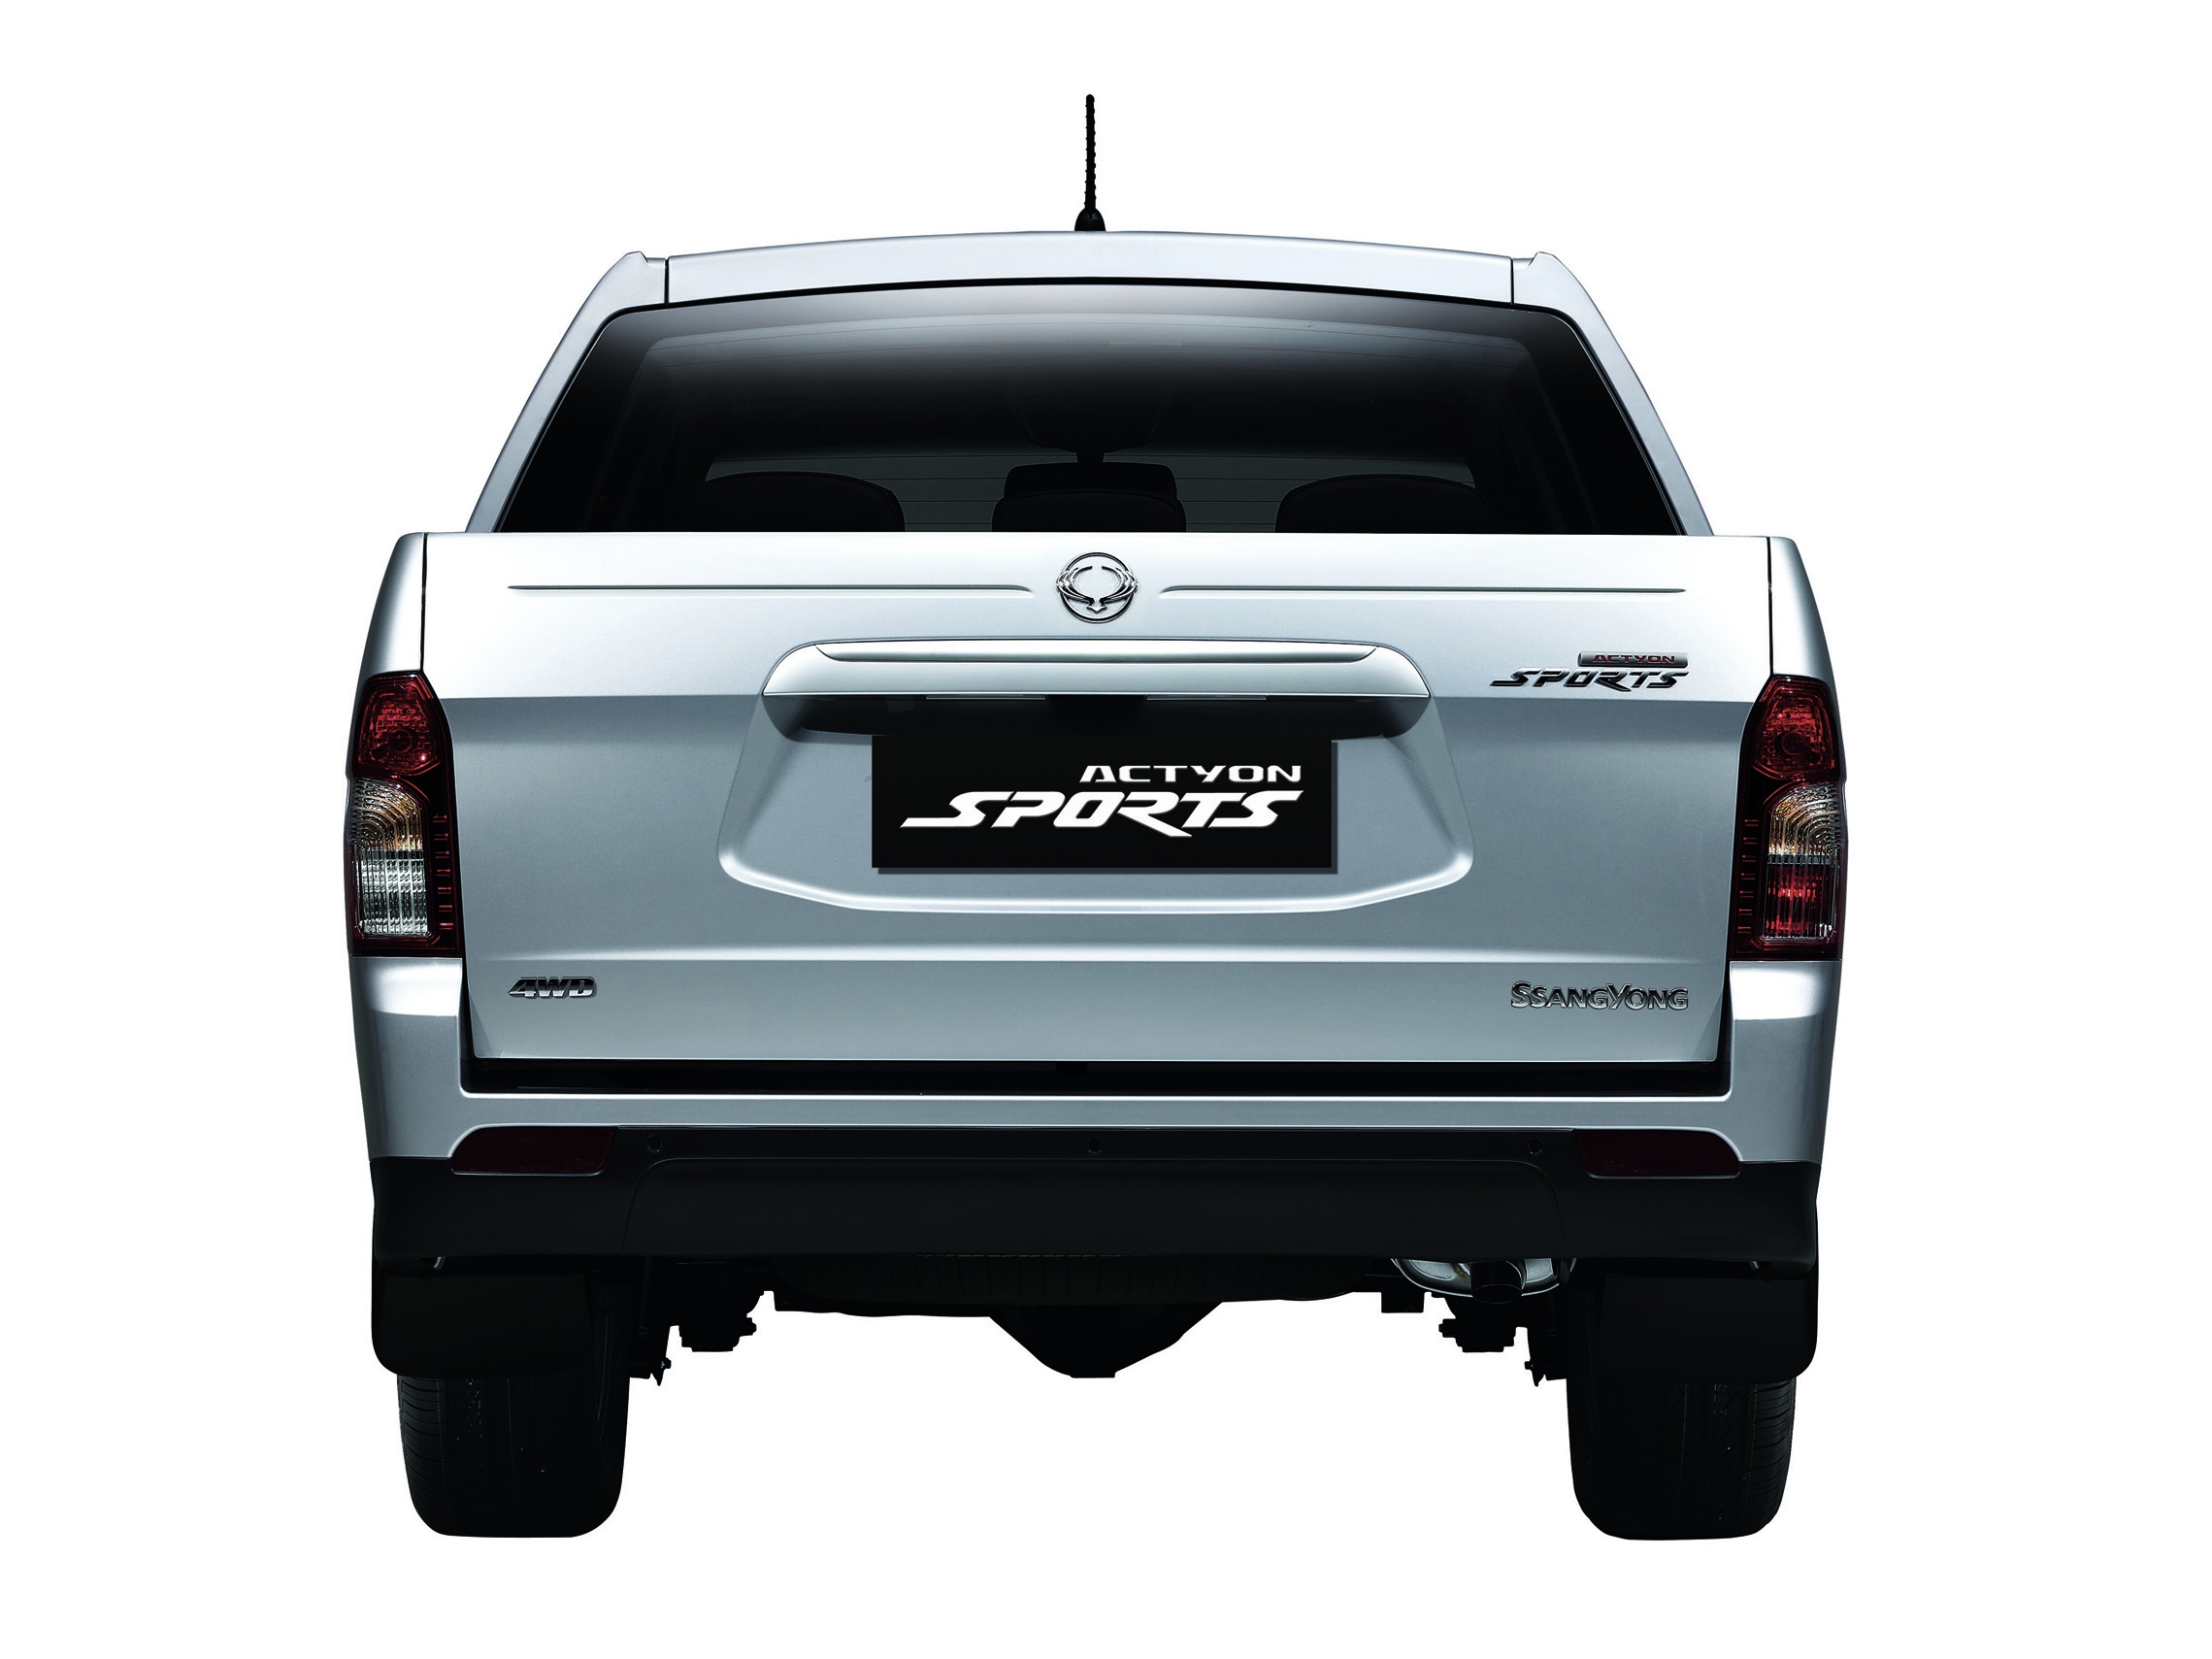 Ssangyong actyon sport 2012. Саньенг Актион спорт 2015. SSANGYONG Actyon Sports 2012. ССАНГЙОНГ Актион спорт 2. Саньенг Actyon Sports.